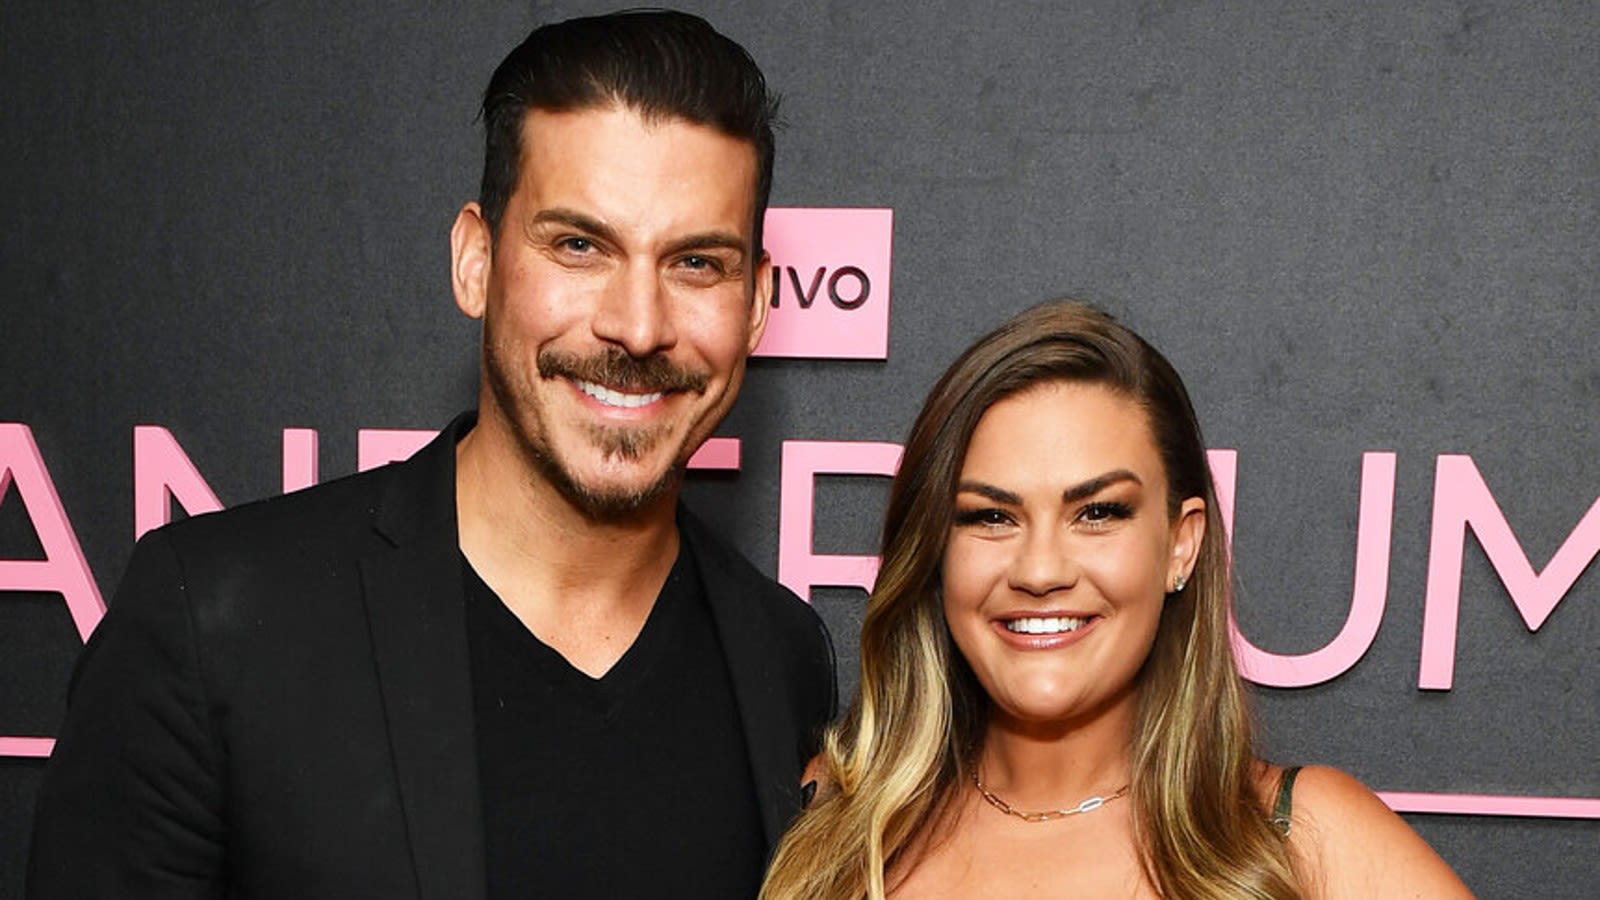 Jax Taylor sparks romance rumors with influencer amid Brittany Cartwright separation - Dexerto